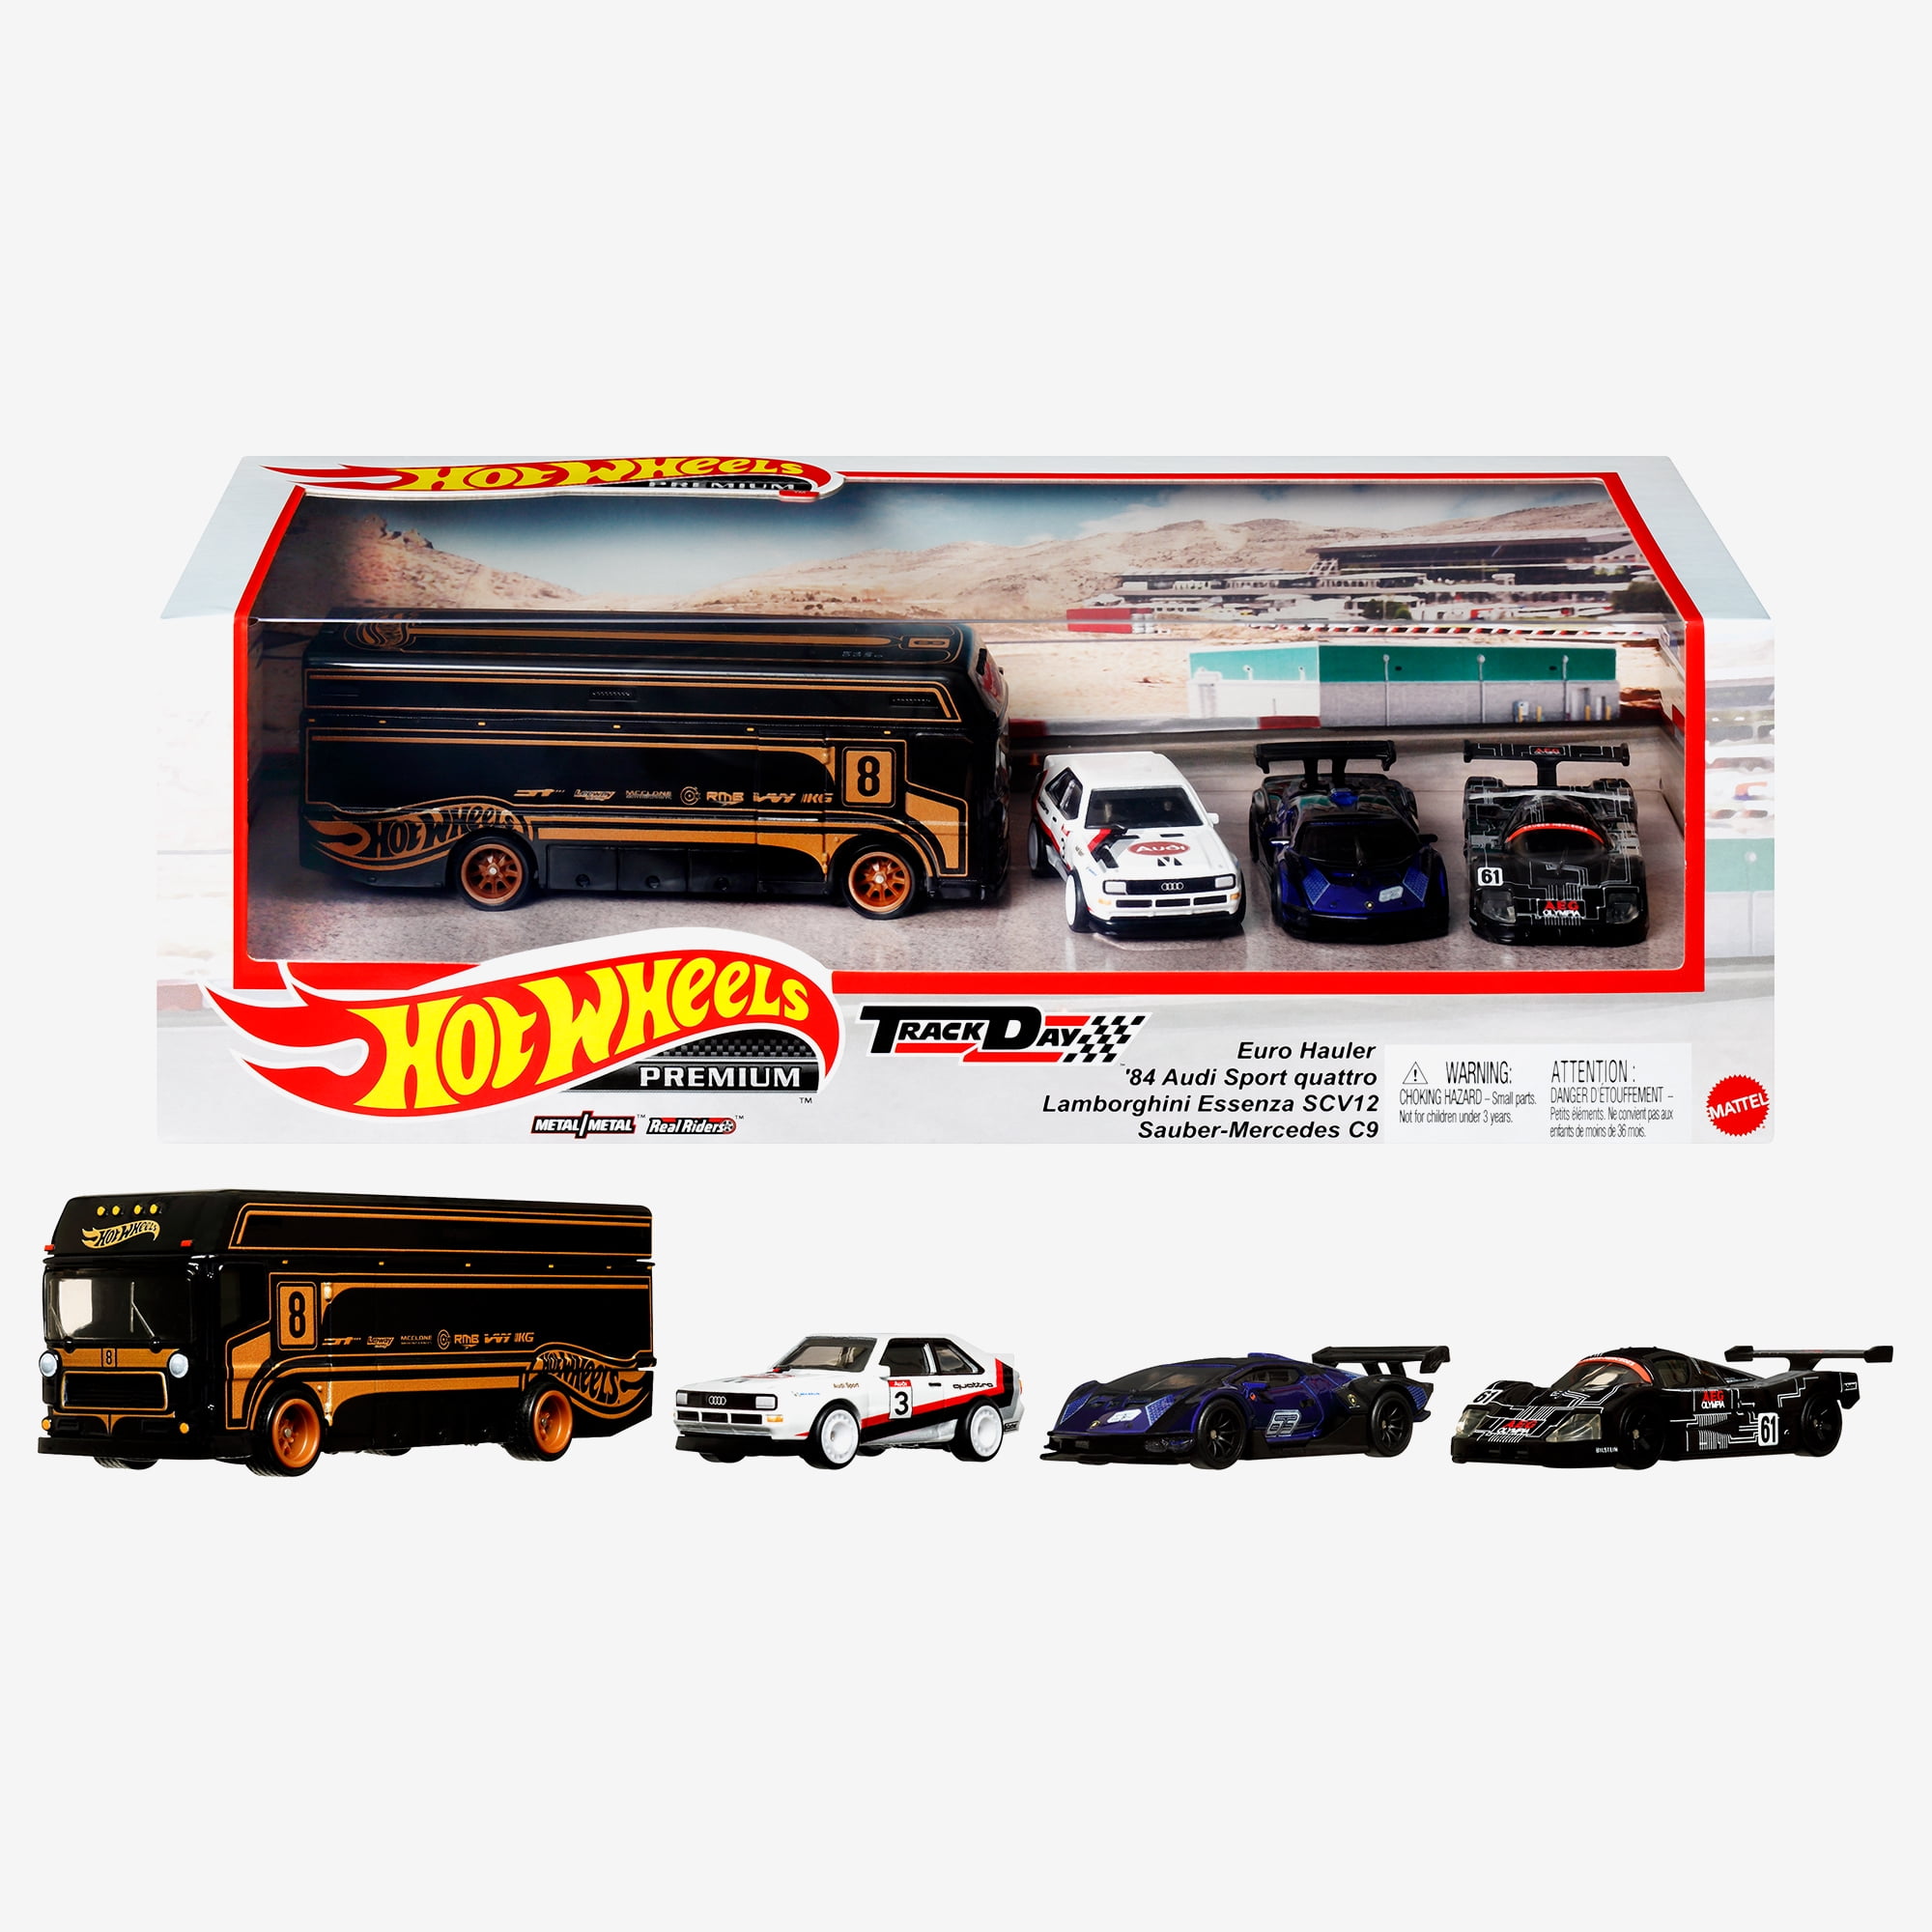 Hot Wheels Premium Collector Display Set: 3 Toy Cars & 1 Team Transport  Truck (Styles May Vary)